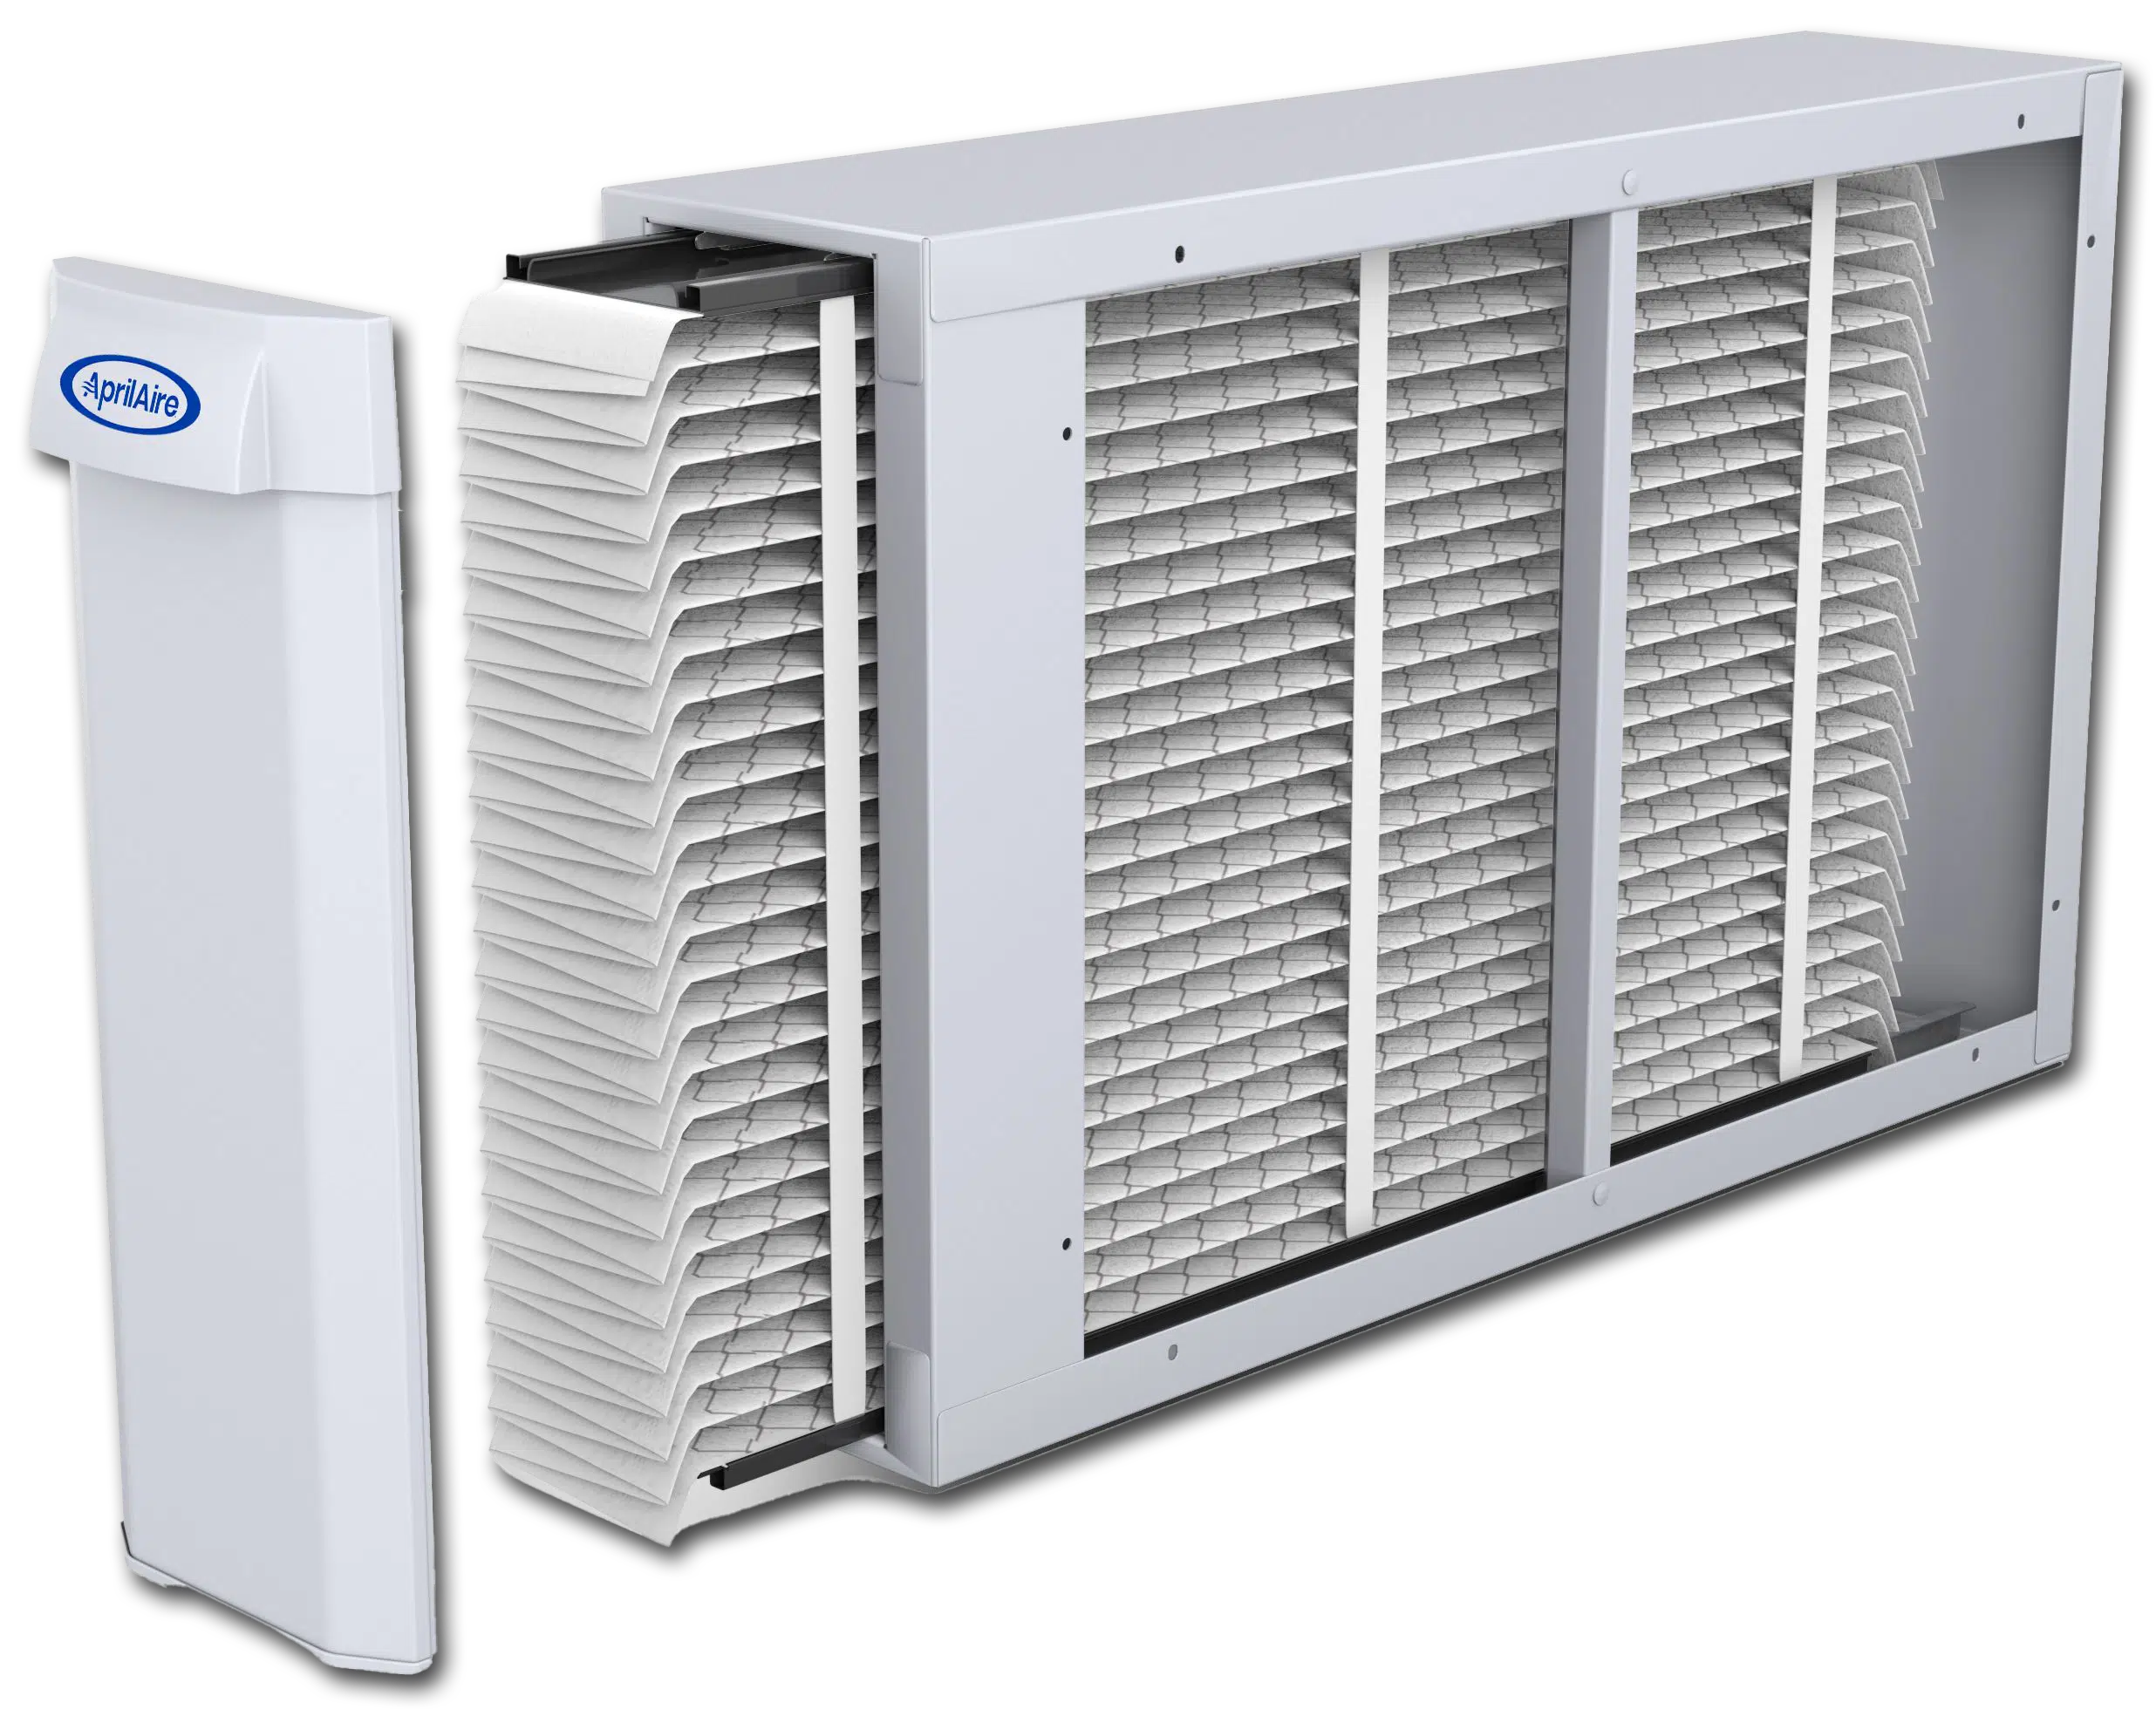 aprilaire-2416-air-purifier-filter-out-left-facing-photo-shadow